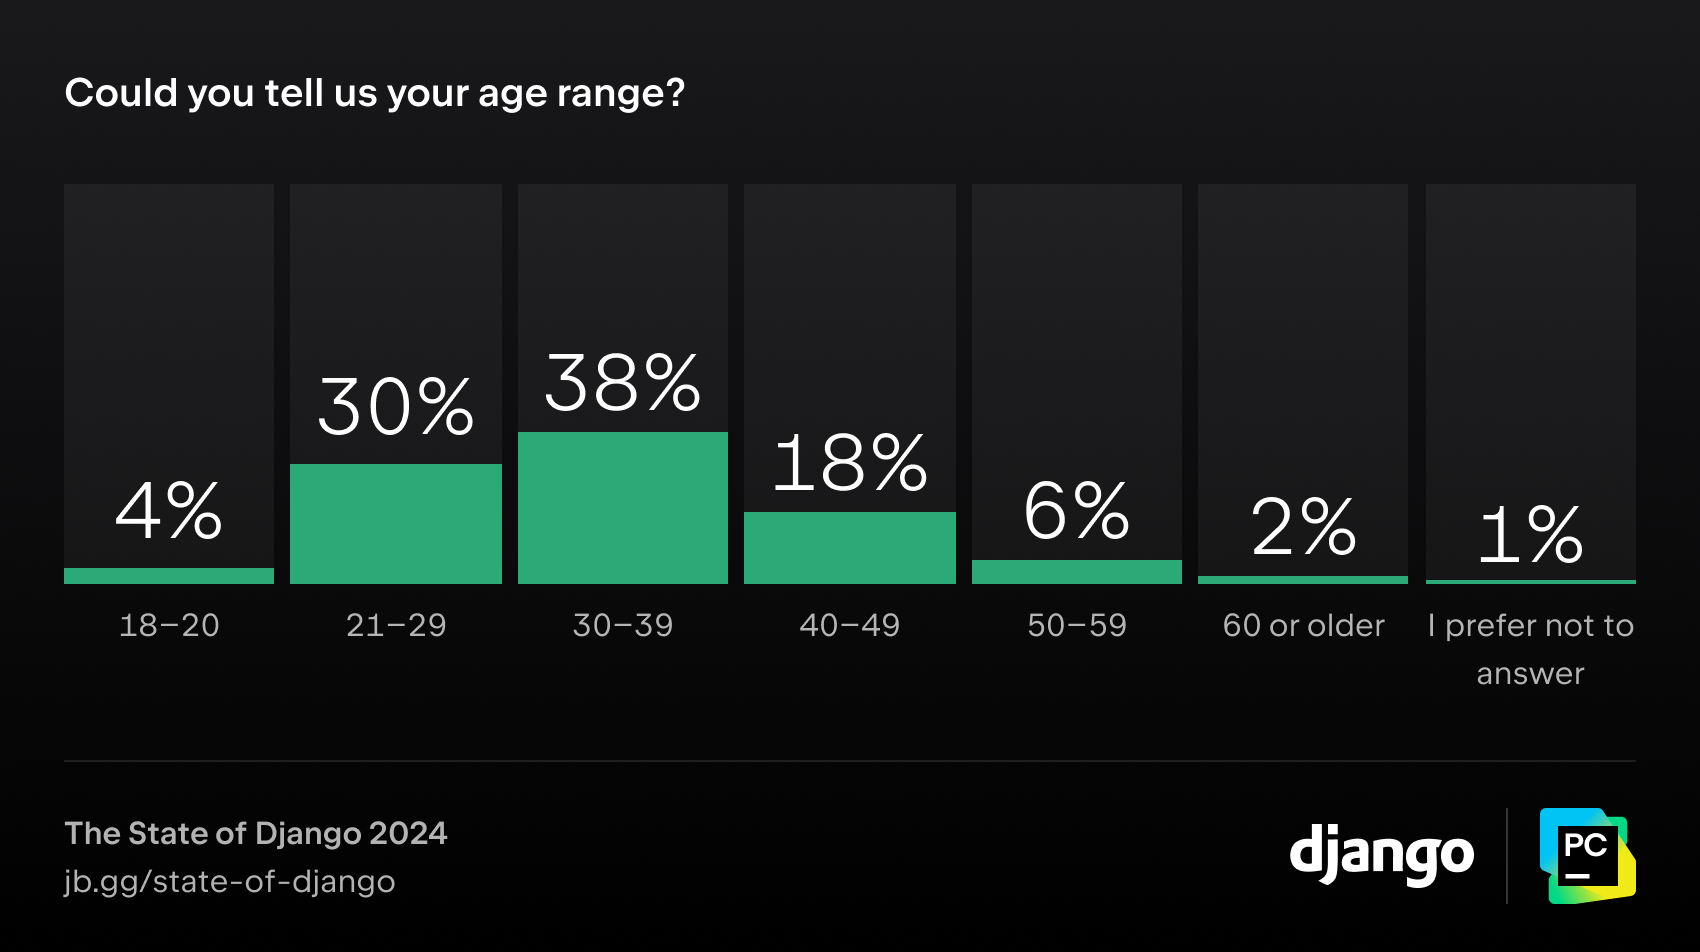 Could you tell us your age range?